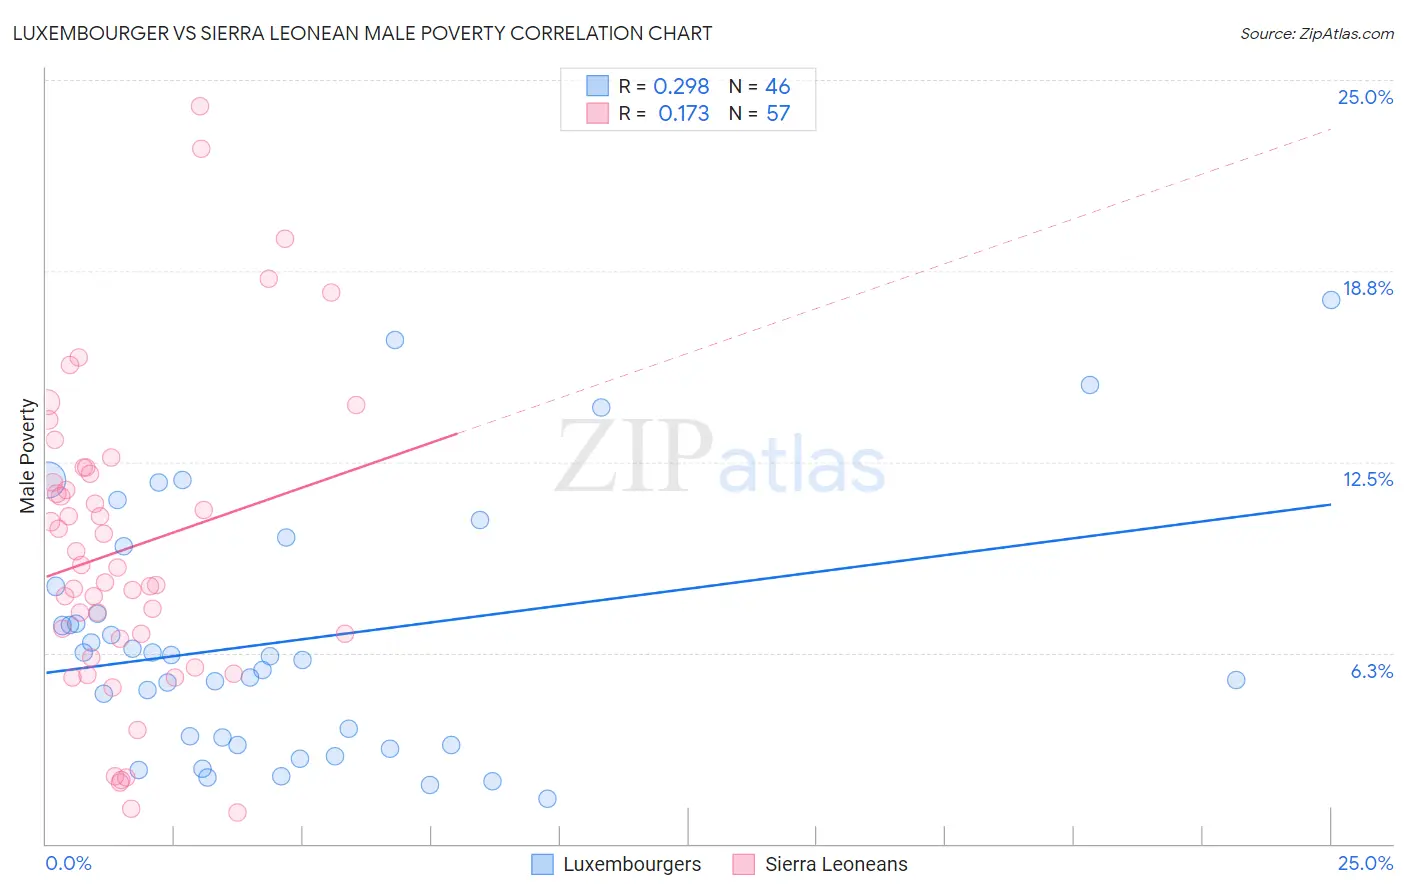 Luxembourger vs Sierra Leonean Male Poverty